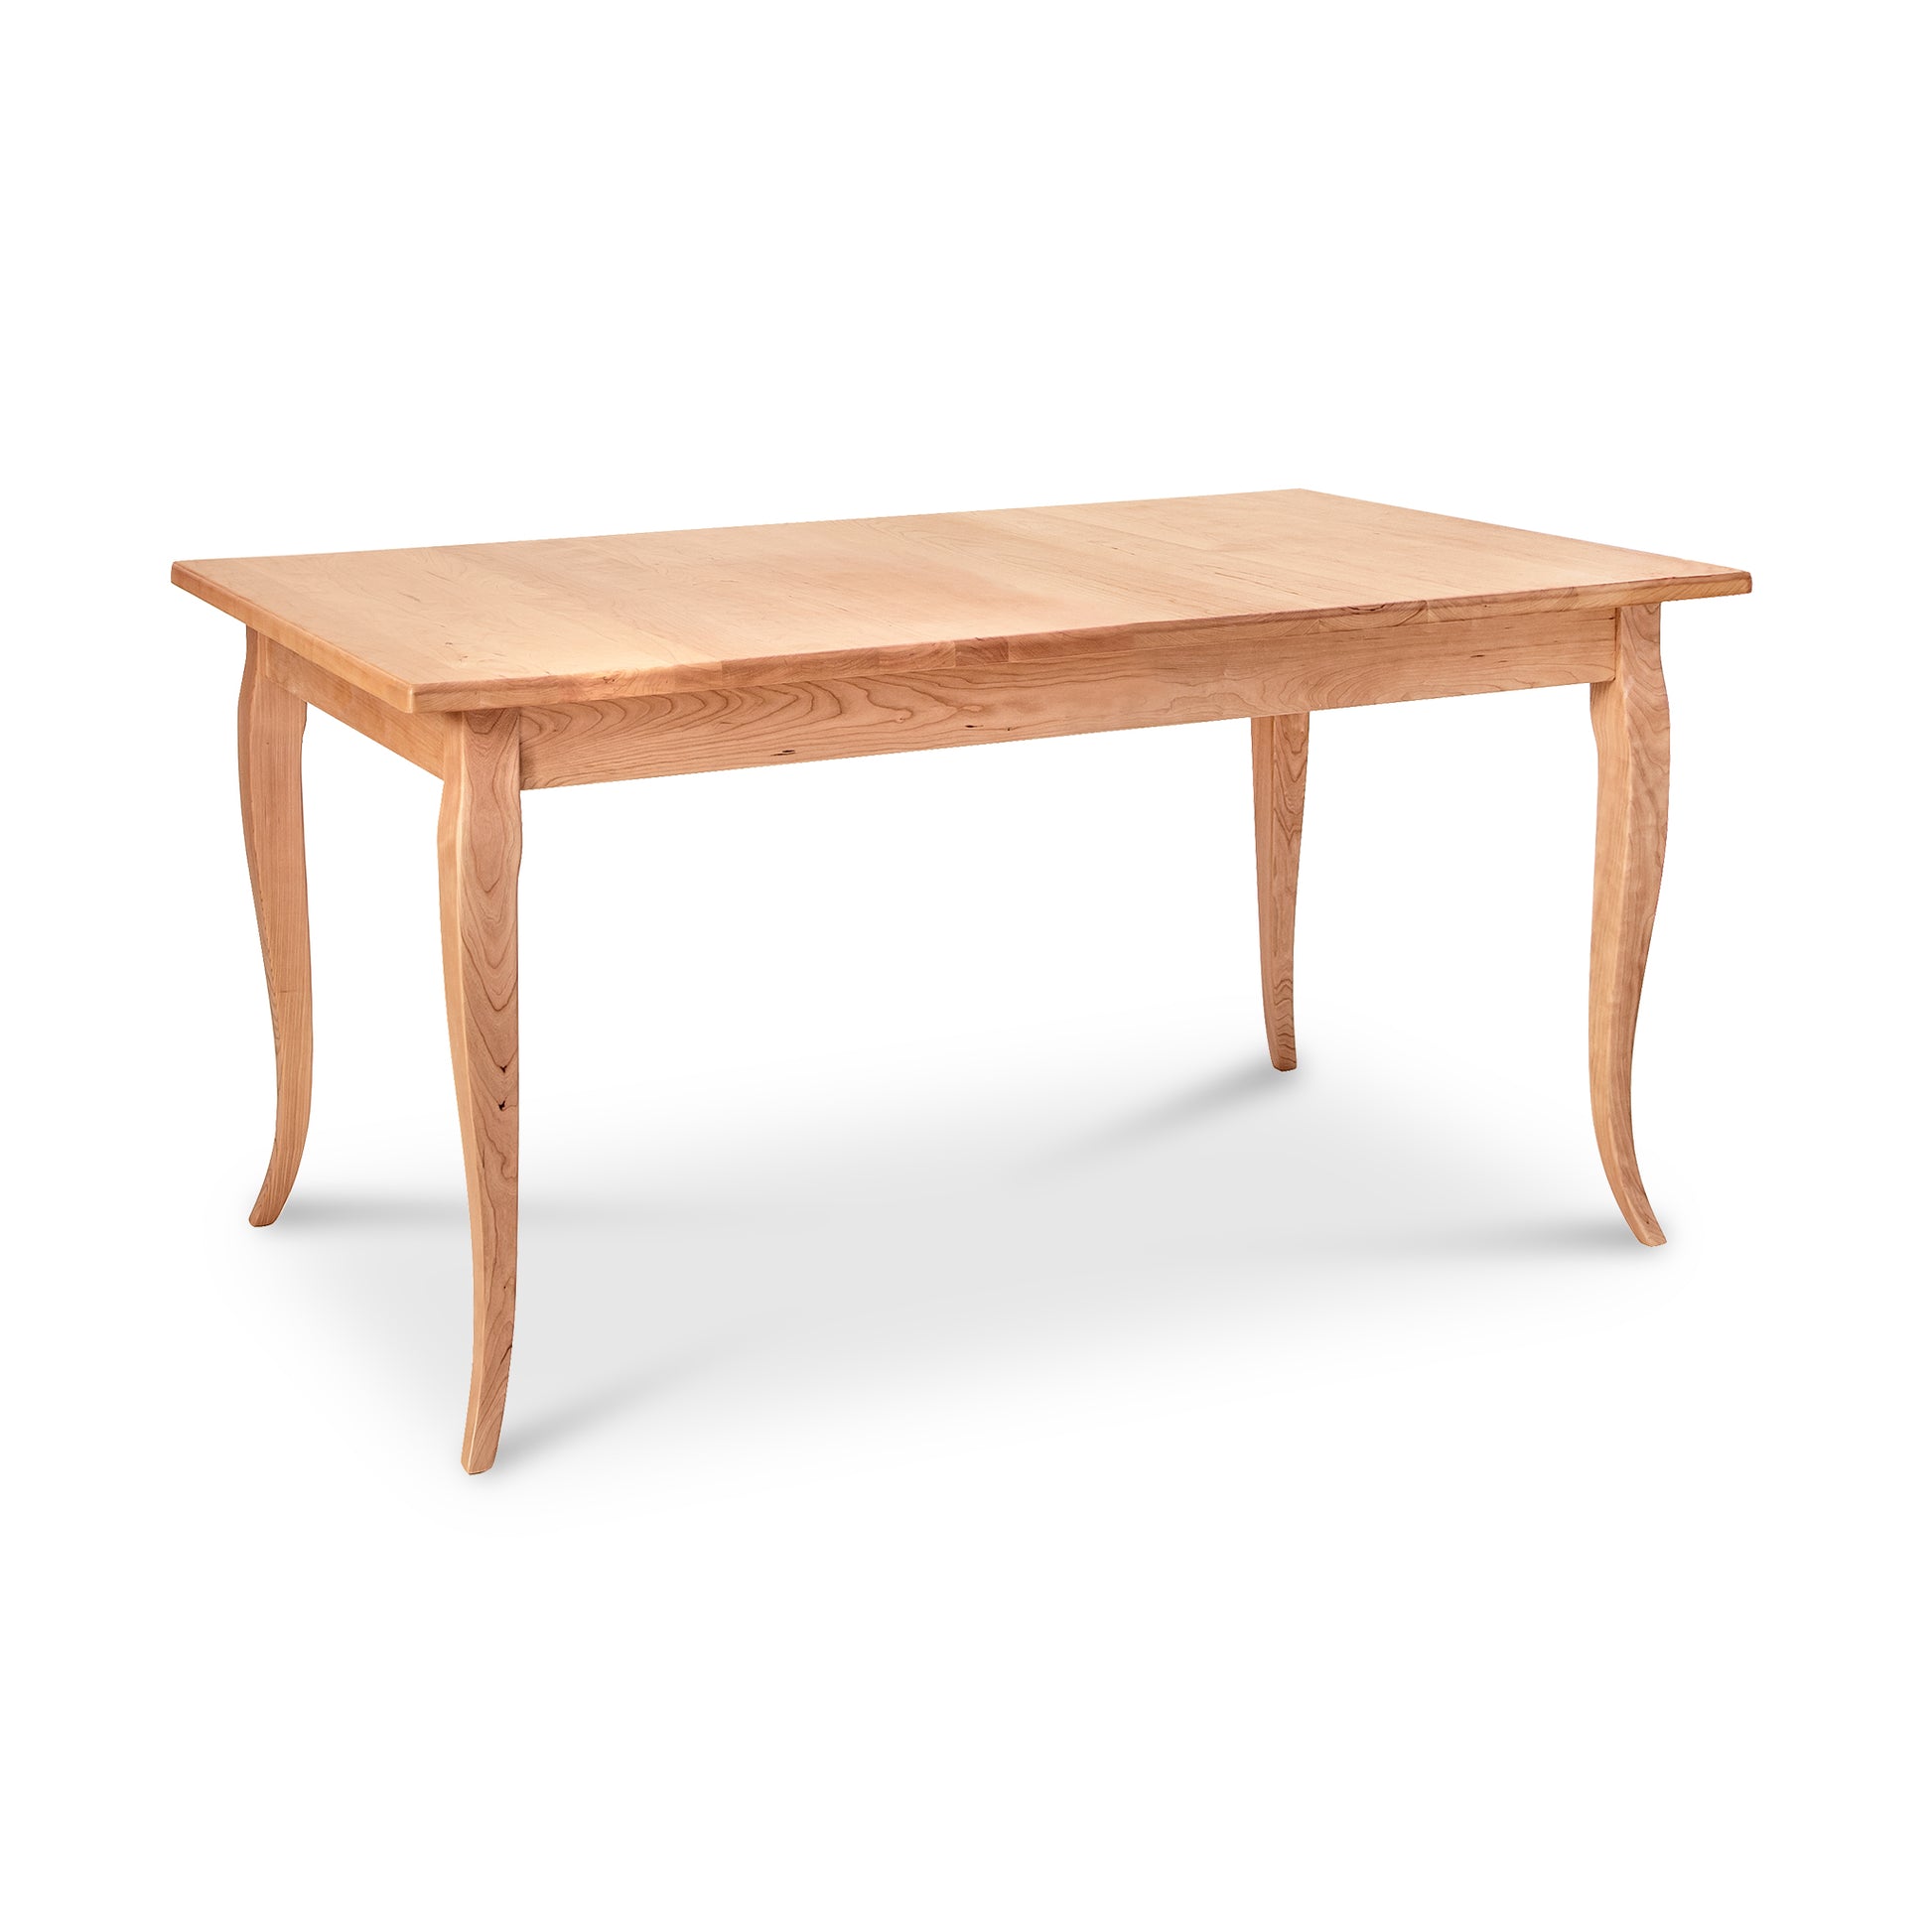 A French Country Solid Top Dining Table with wooden legs, sourced sustainably by Lyndon Furniture.